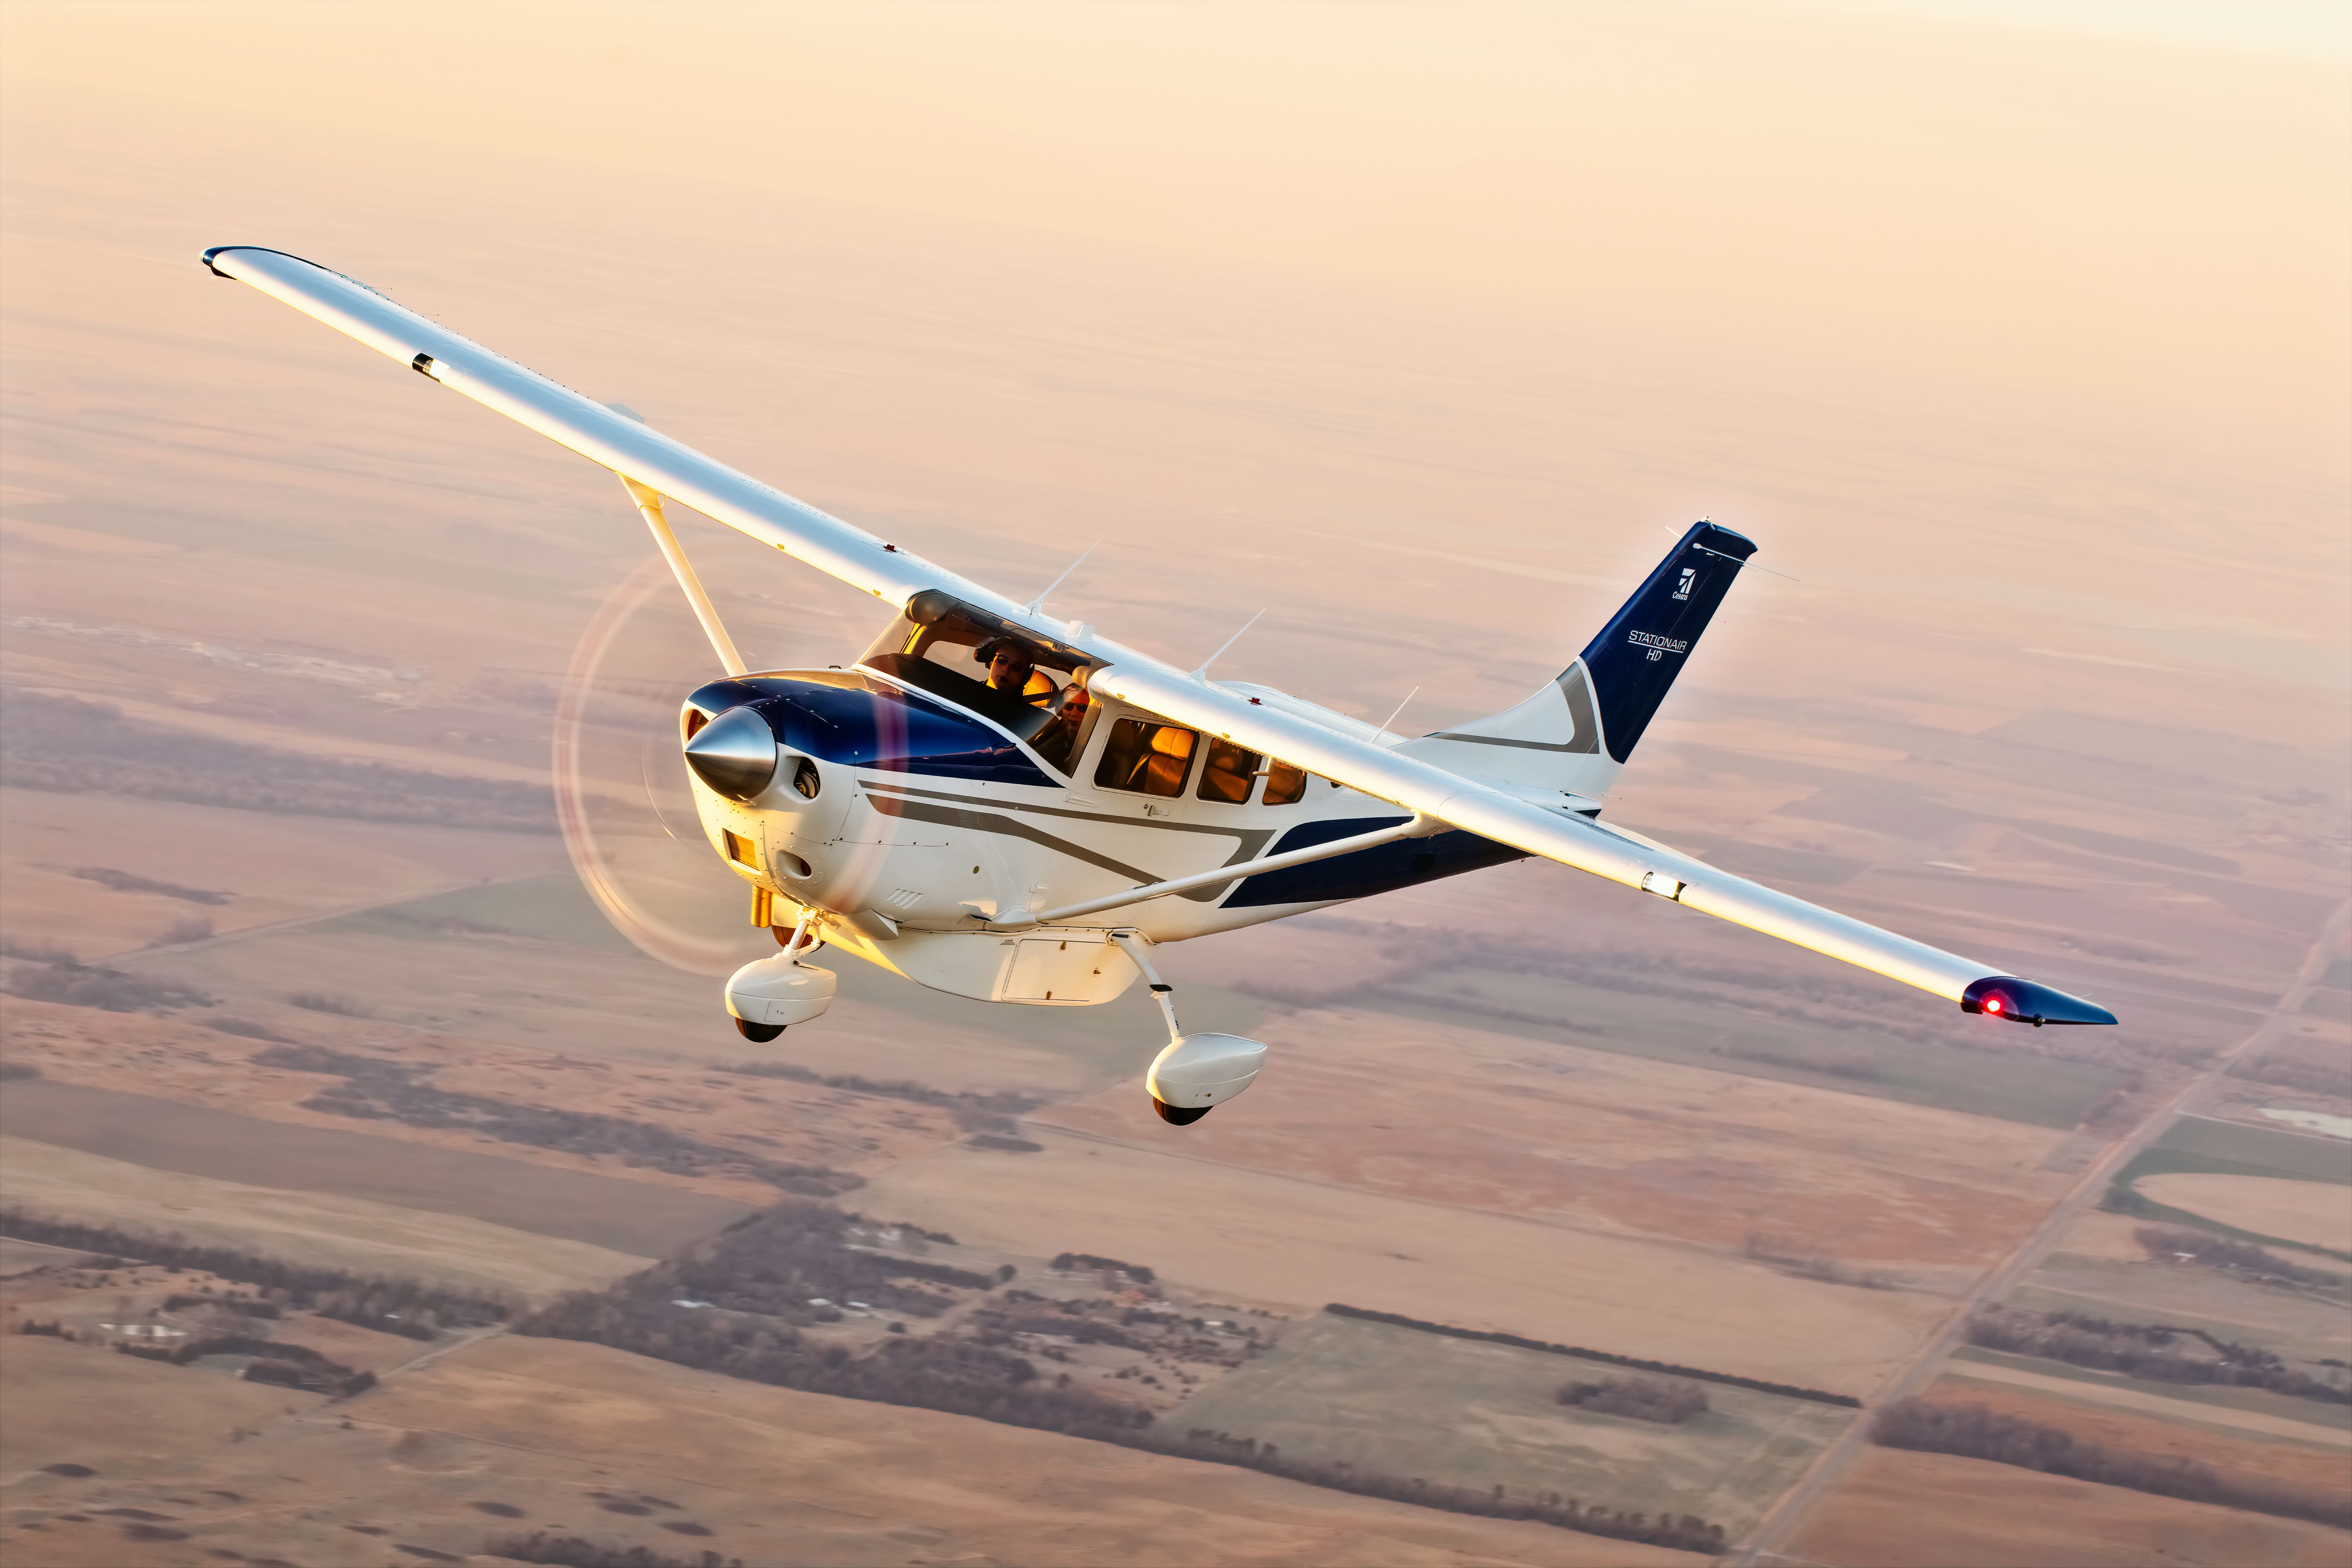 Textron Aviation Cessna T206 Turbo Stationair in the air